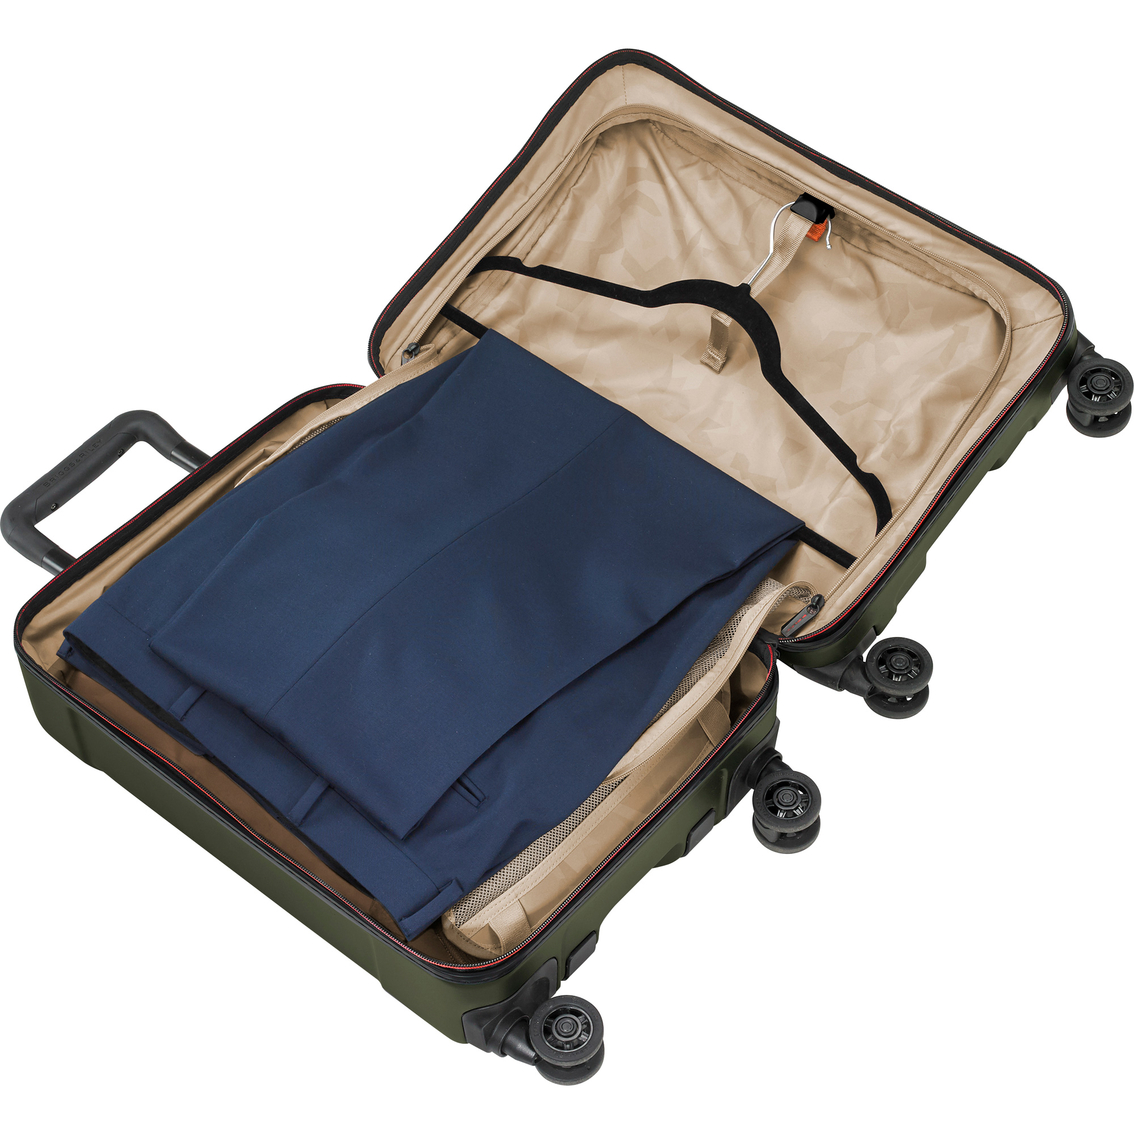 Briggs & Riley Torq 21 in. International Carry-On Spinner - Image 8 of 10